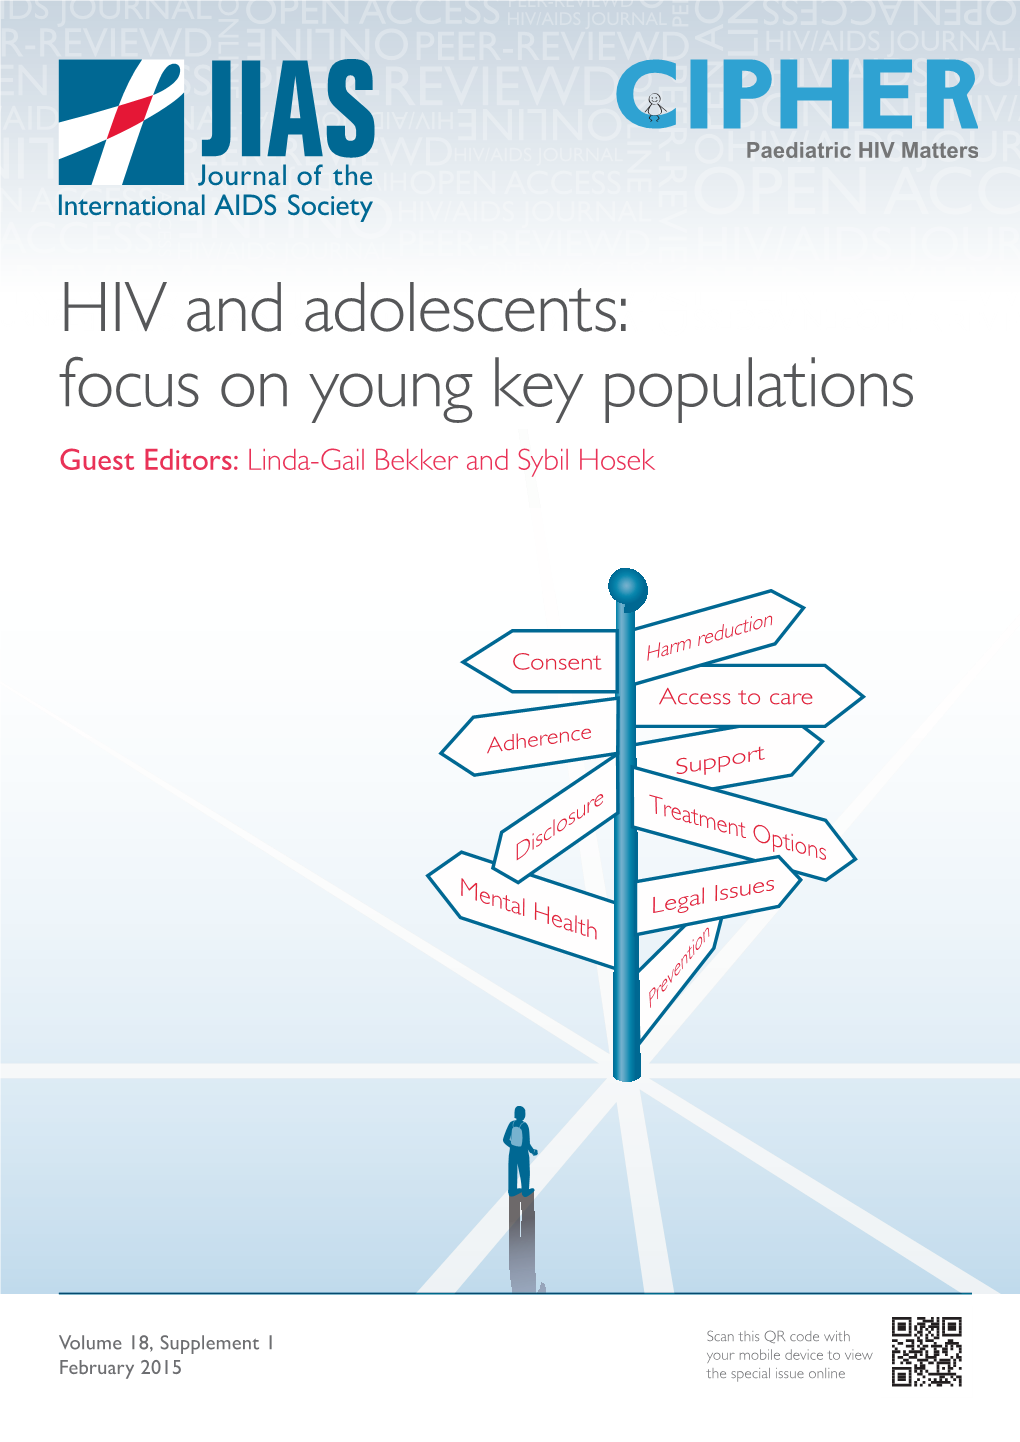 HIV and Adolescents: Focus on Young Key Populations